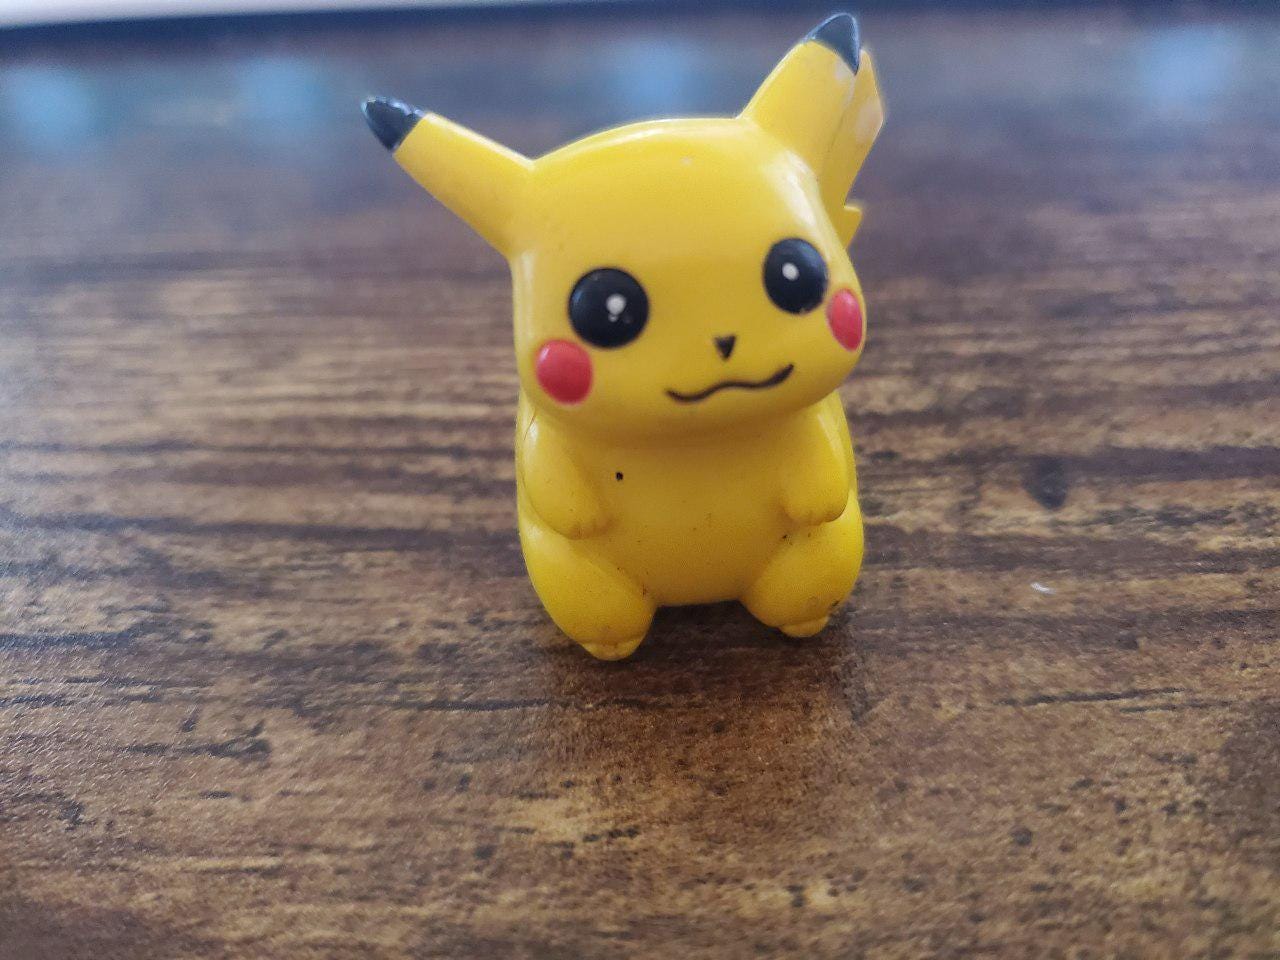 A Pikachu Pencil Topper was one of the many pieces of Pokémon swag that was given out during the event (Photo credit: Shayne Roberts)